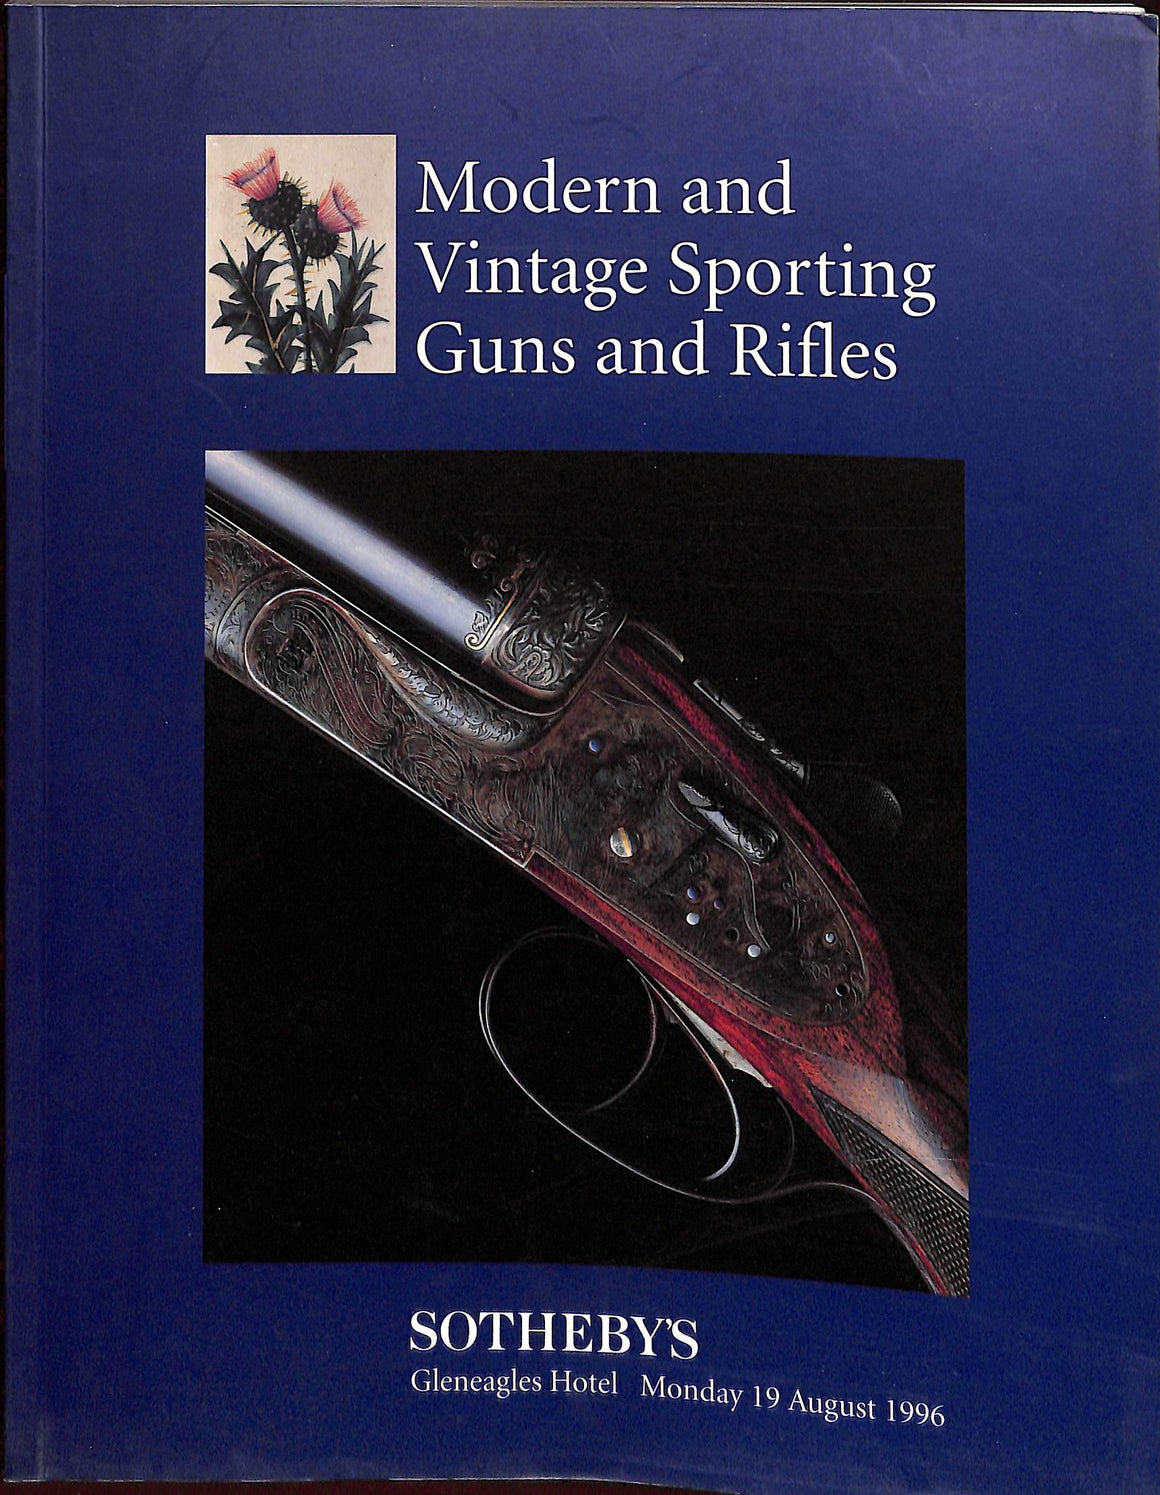 Modern And Vintage Sporting Guns And Rifles - 19 August 1996 Sotheby's